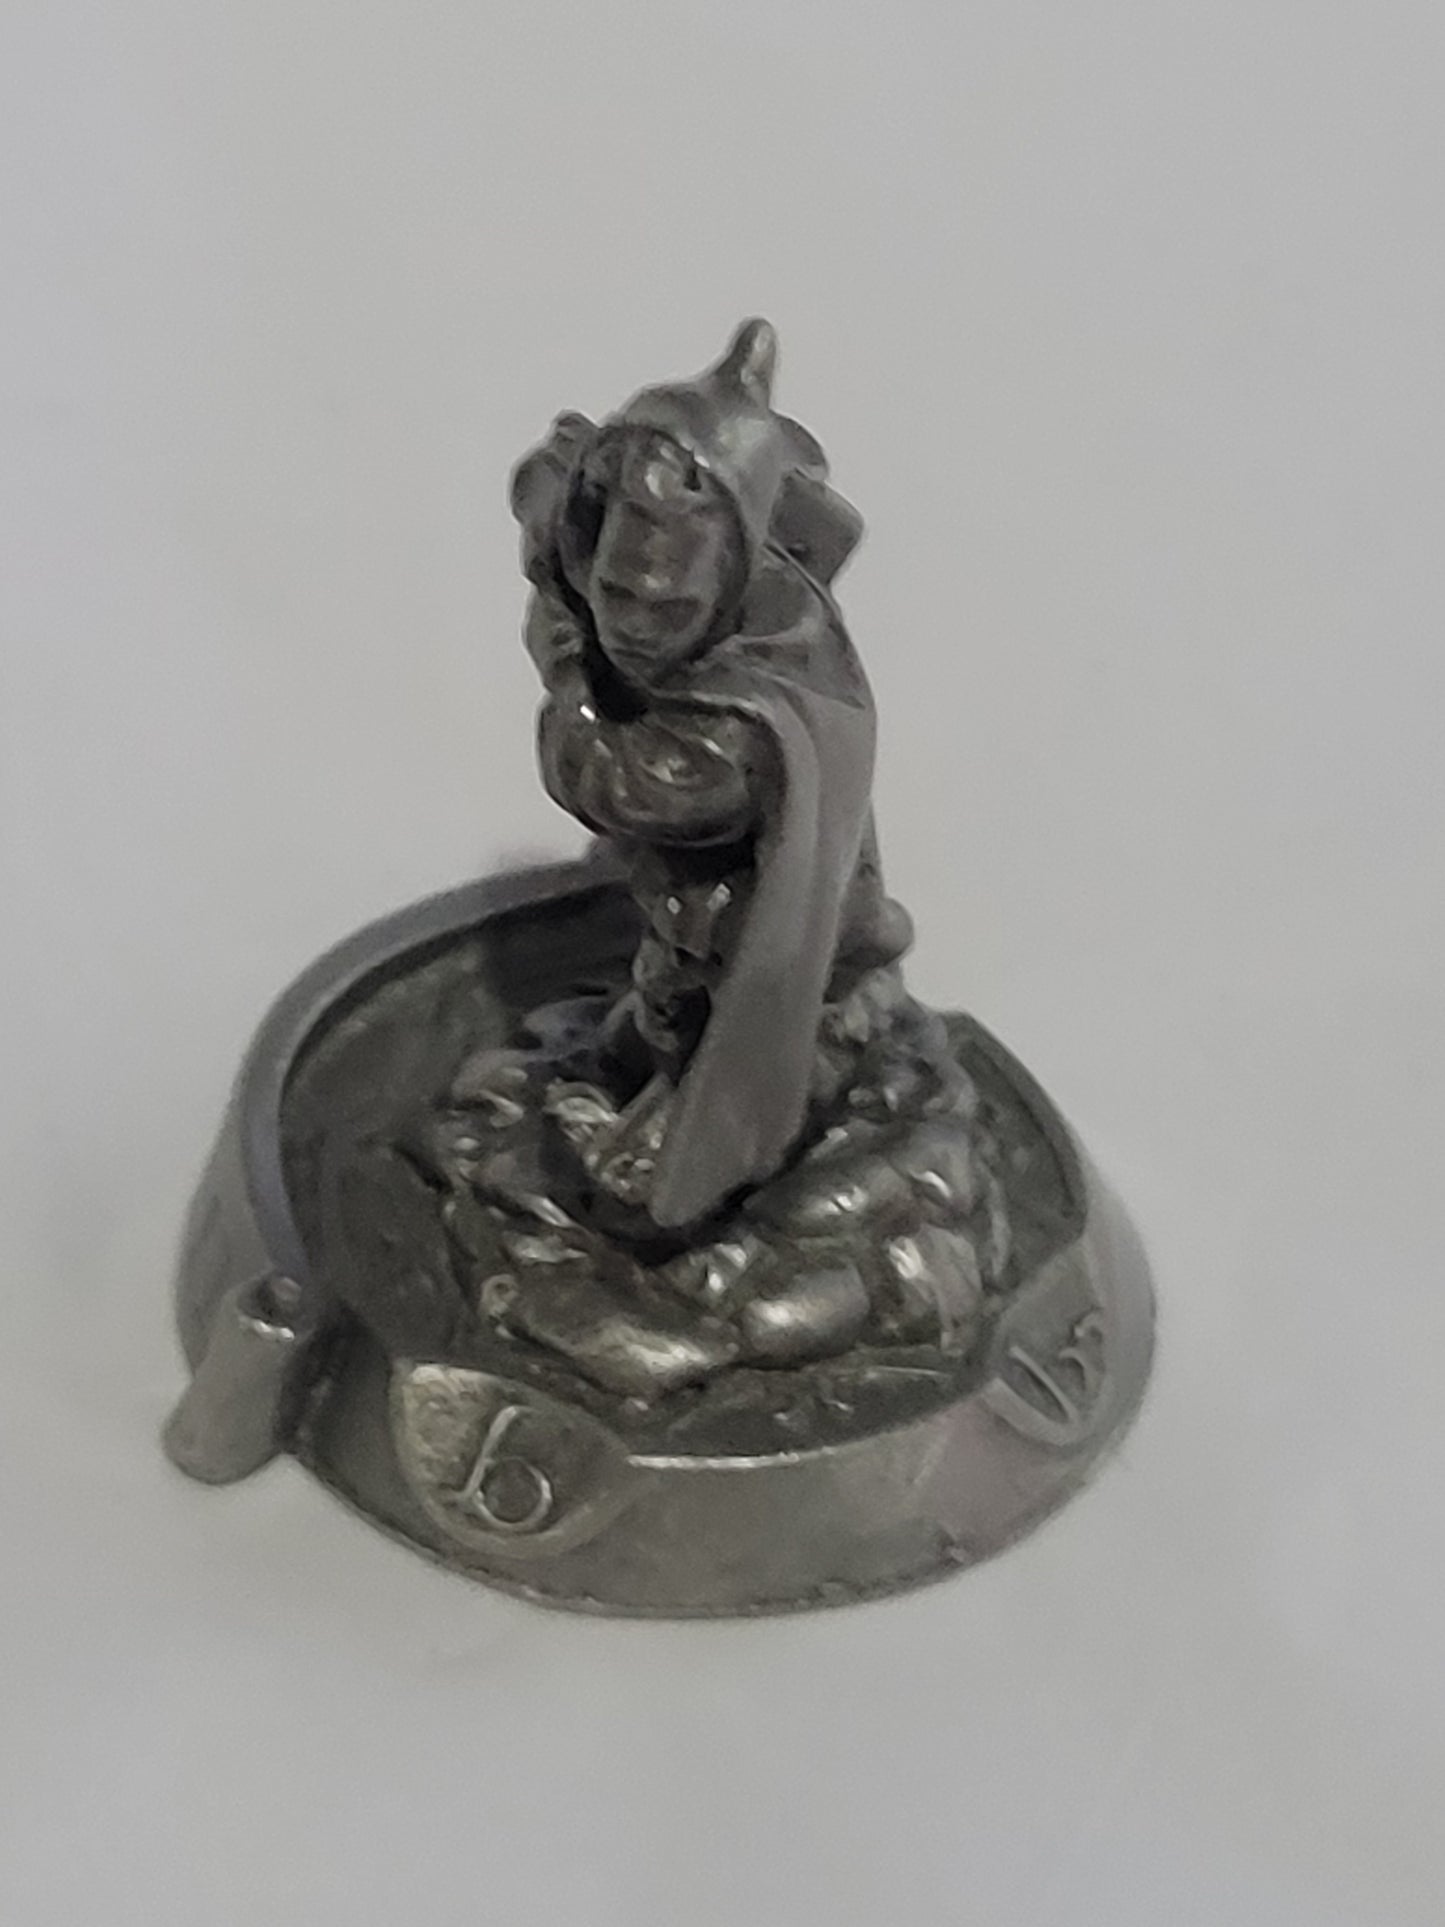 Pippin from the Lord of the Rings by Rawcliffe, Pewter Figurine